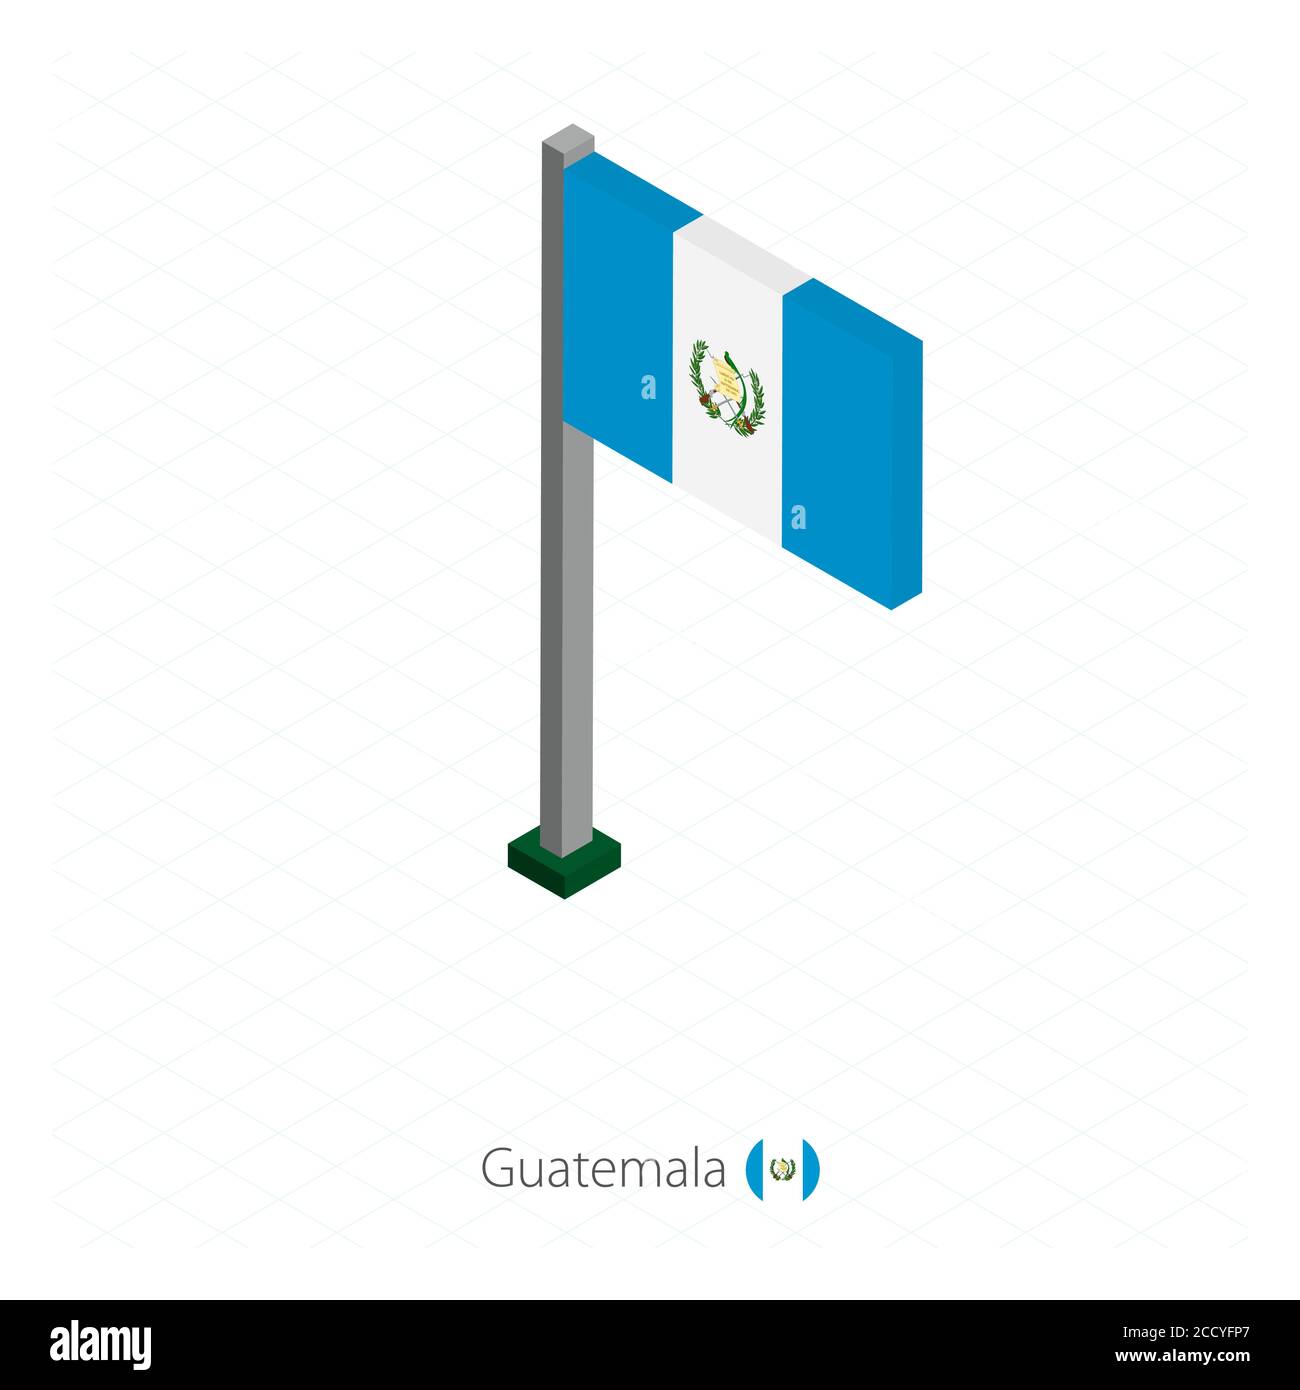 Guatemala Flag on Flagpole in Isometric dimension. Isometric blue background. Vector illustration. Stock Vector